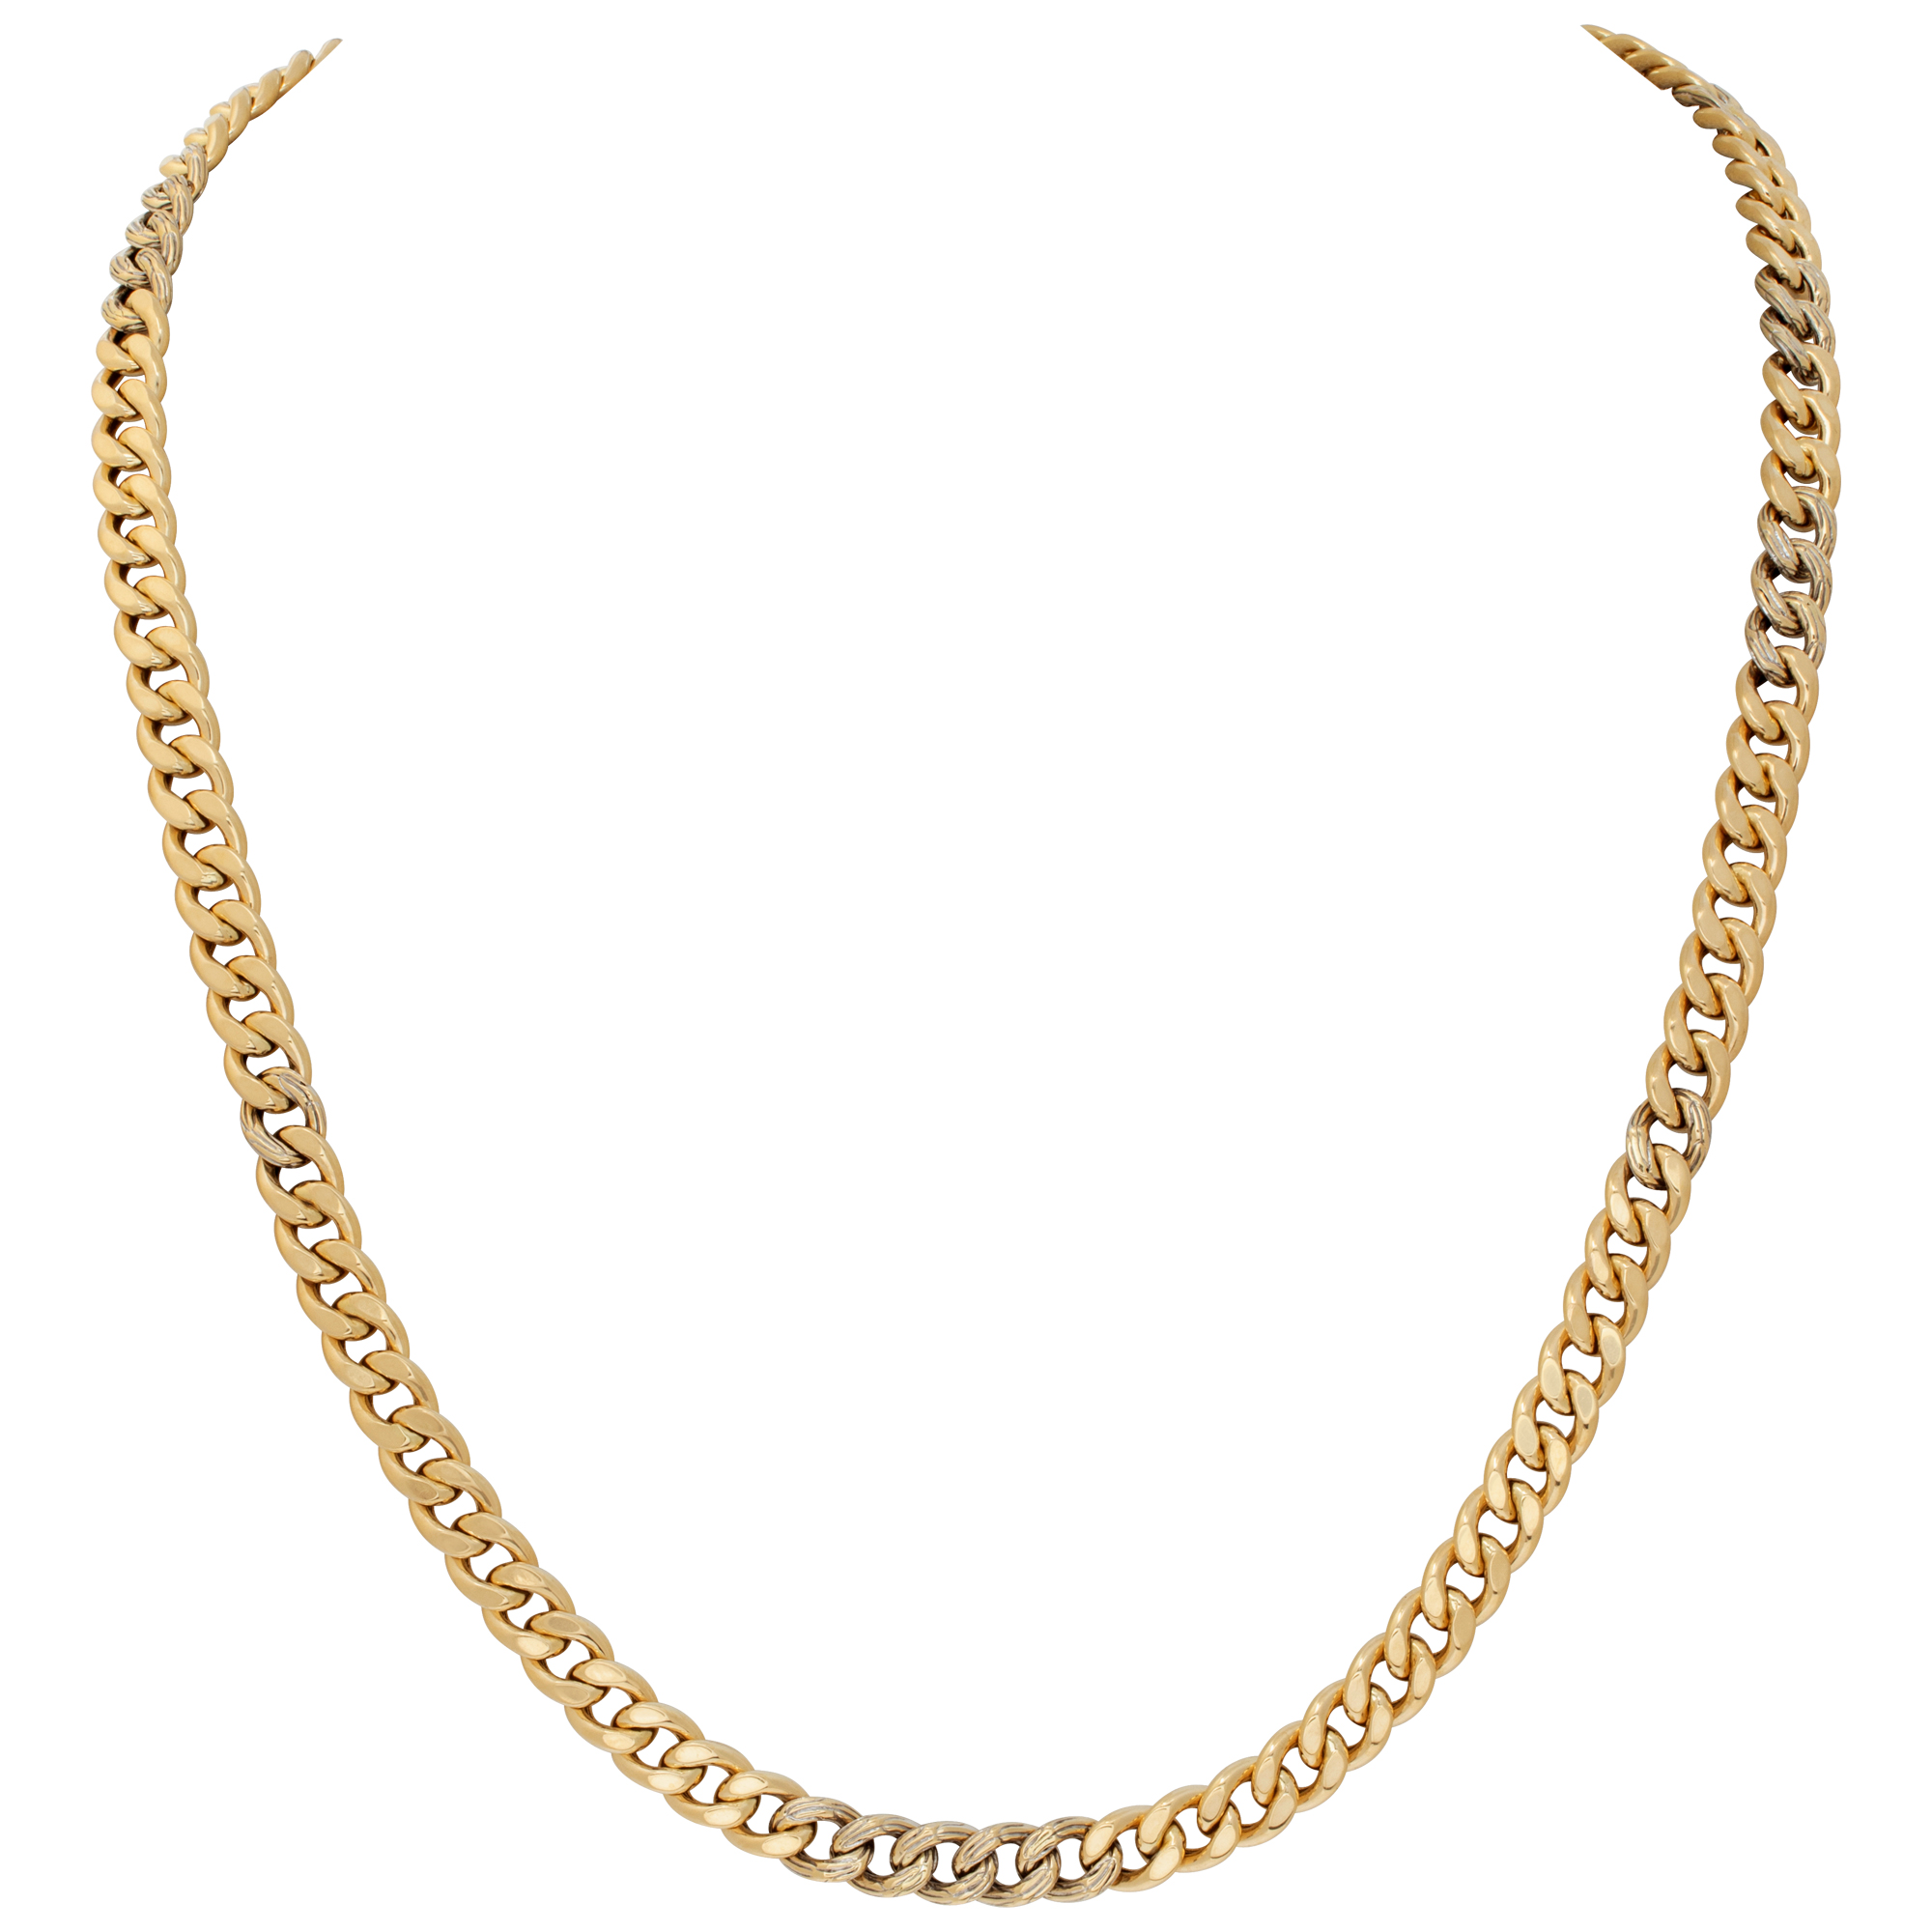 John Hardy link necklace in 18k yellow gold. Measures 26 inches.